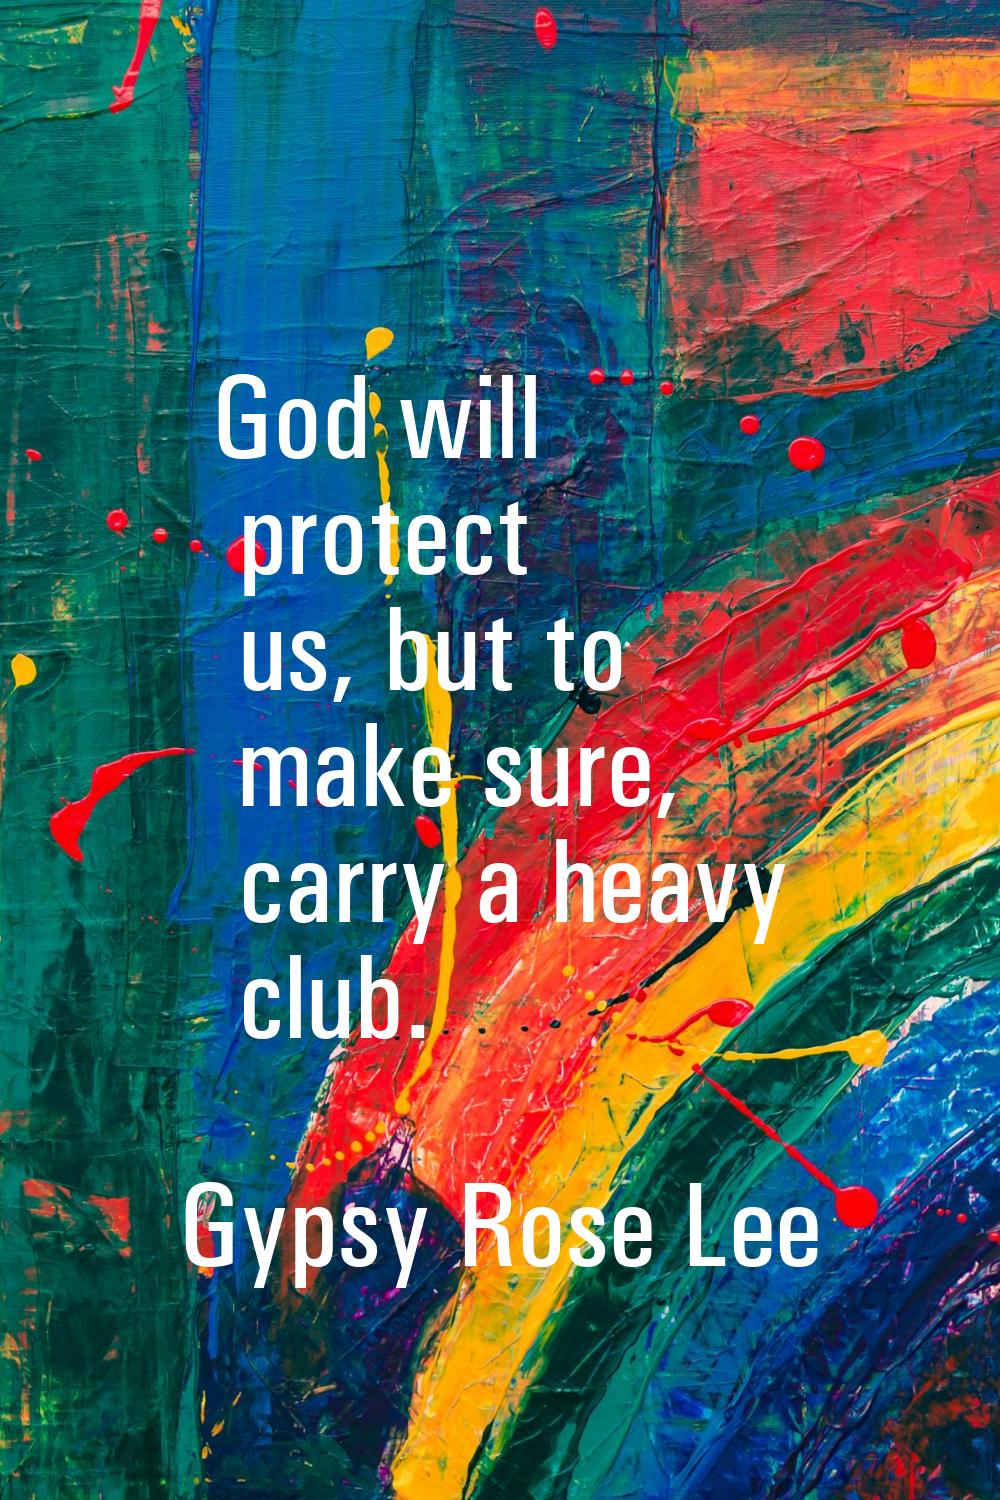 God will protect us, but to make sure, carry a heavy club.